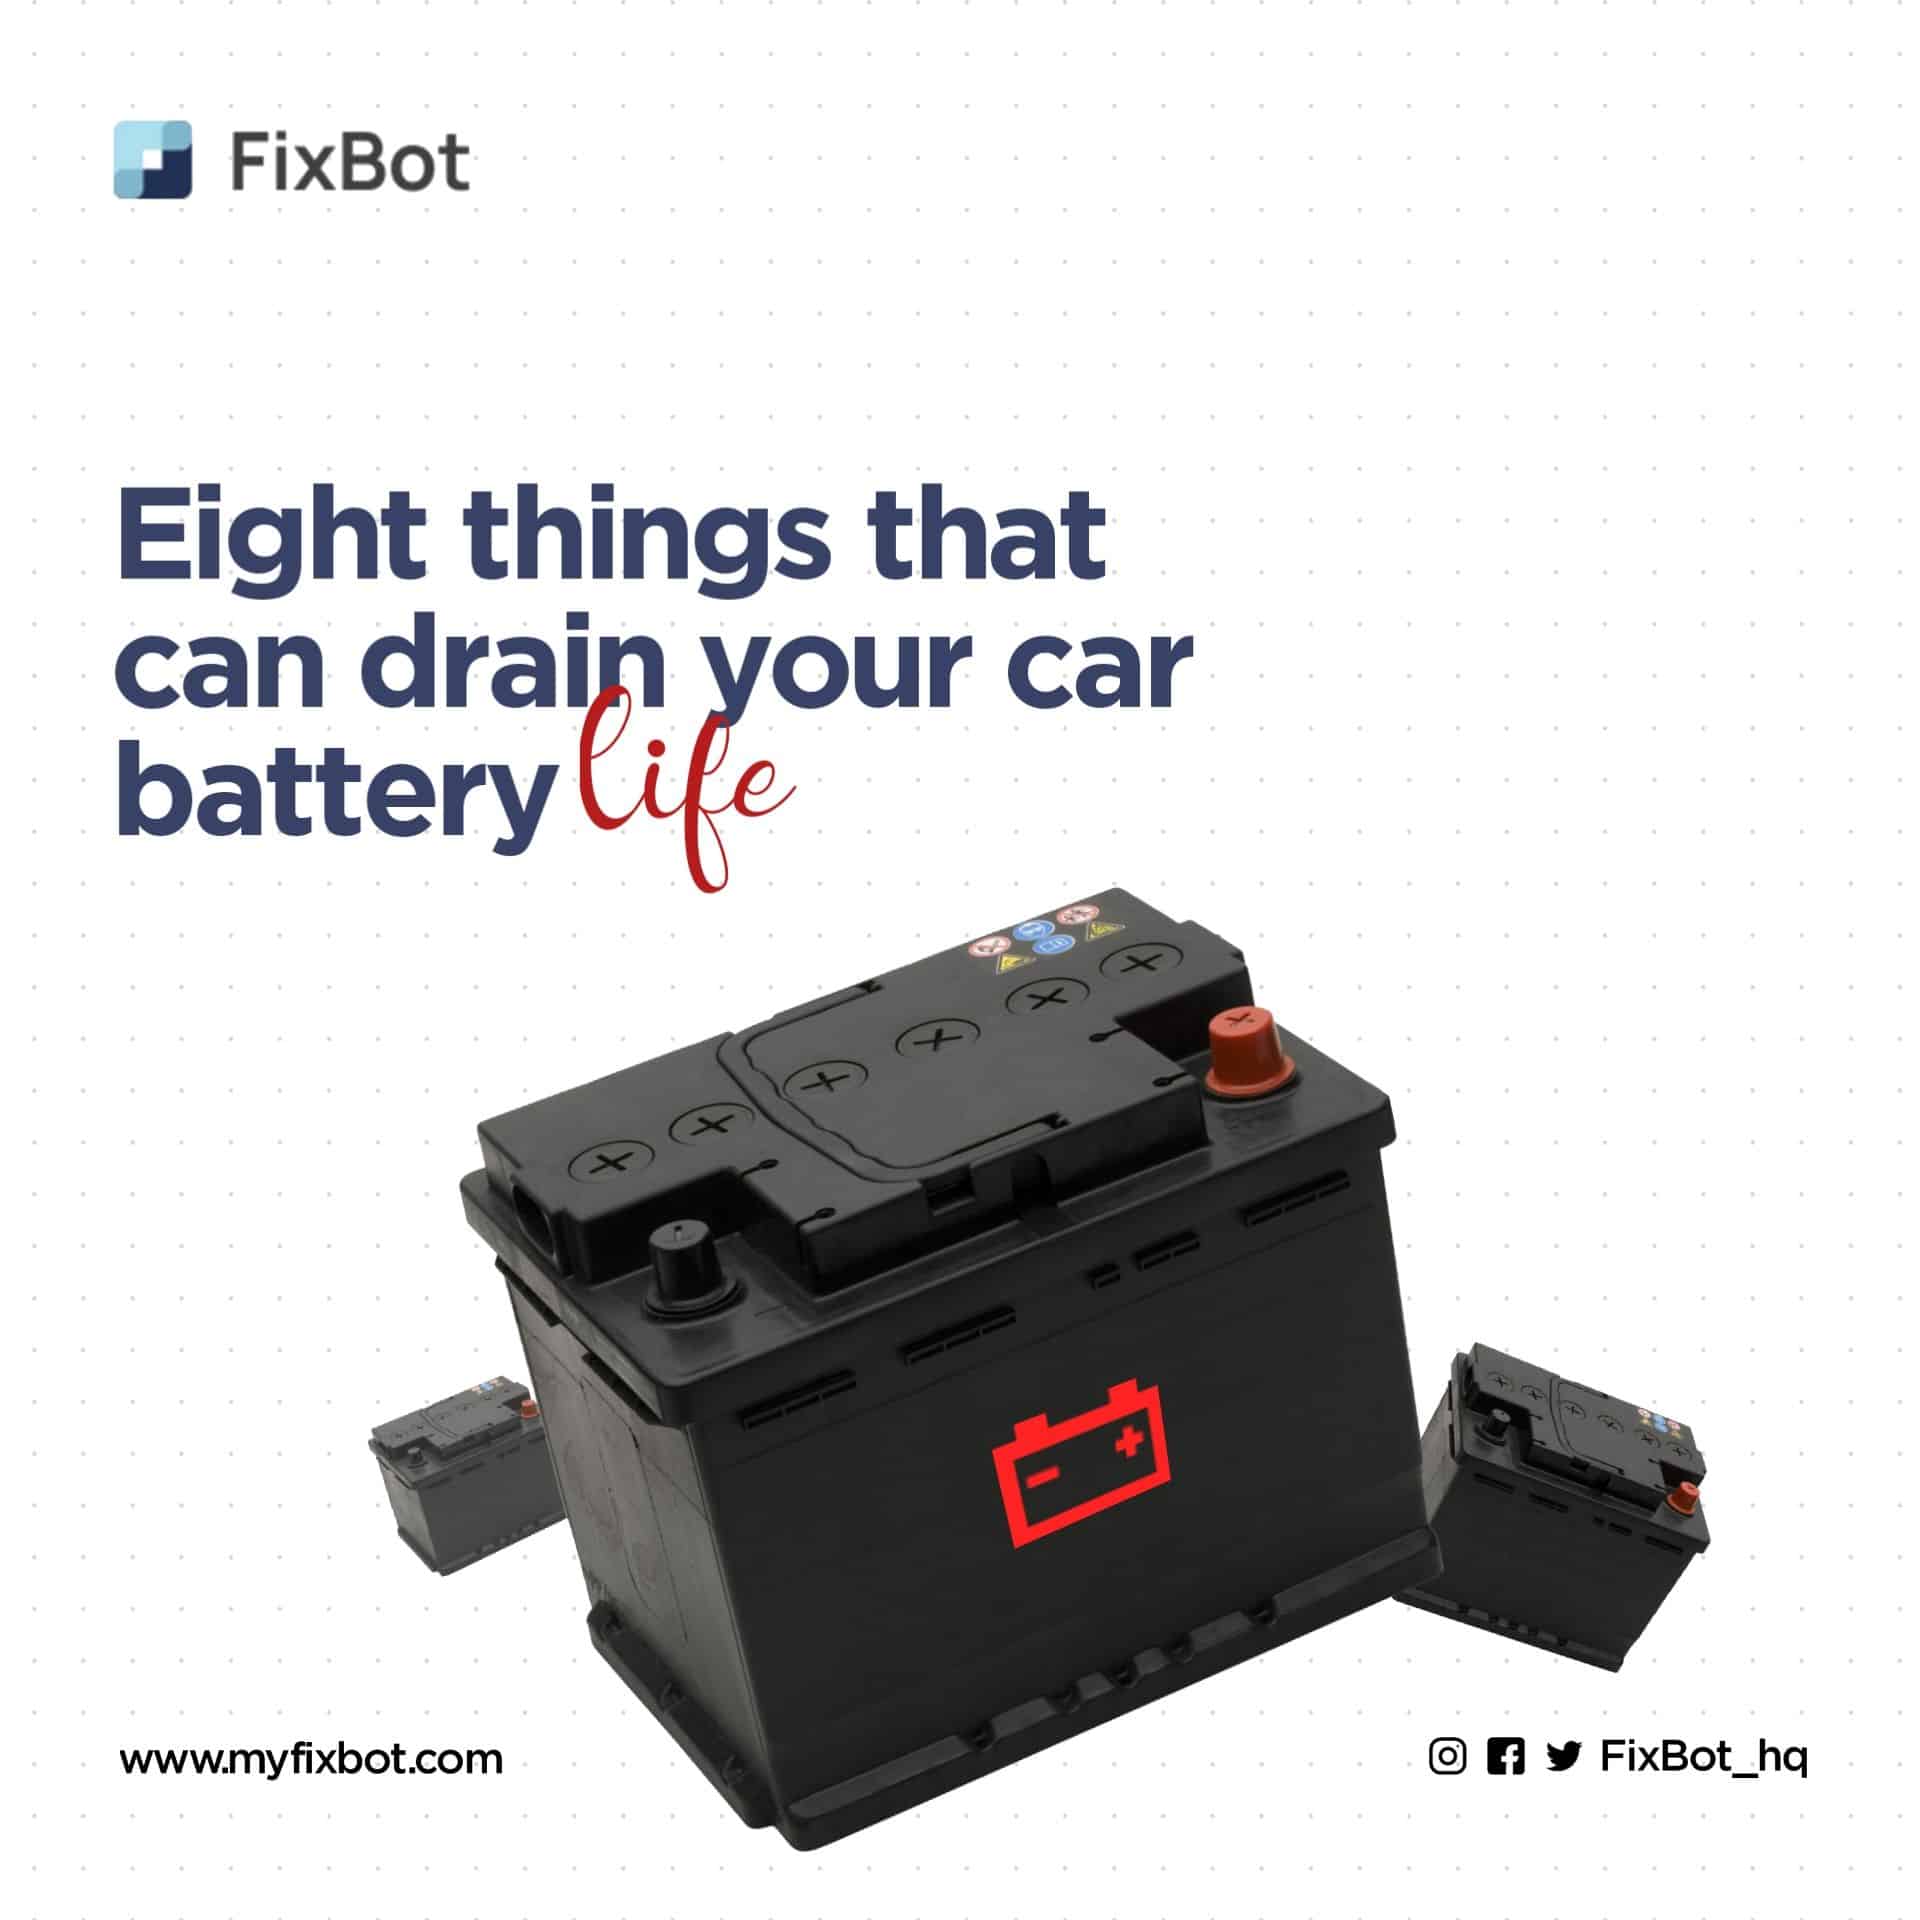 8 Things That can Drain Your Car Battery